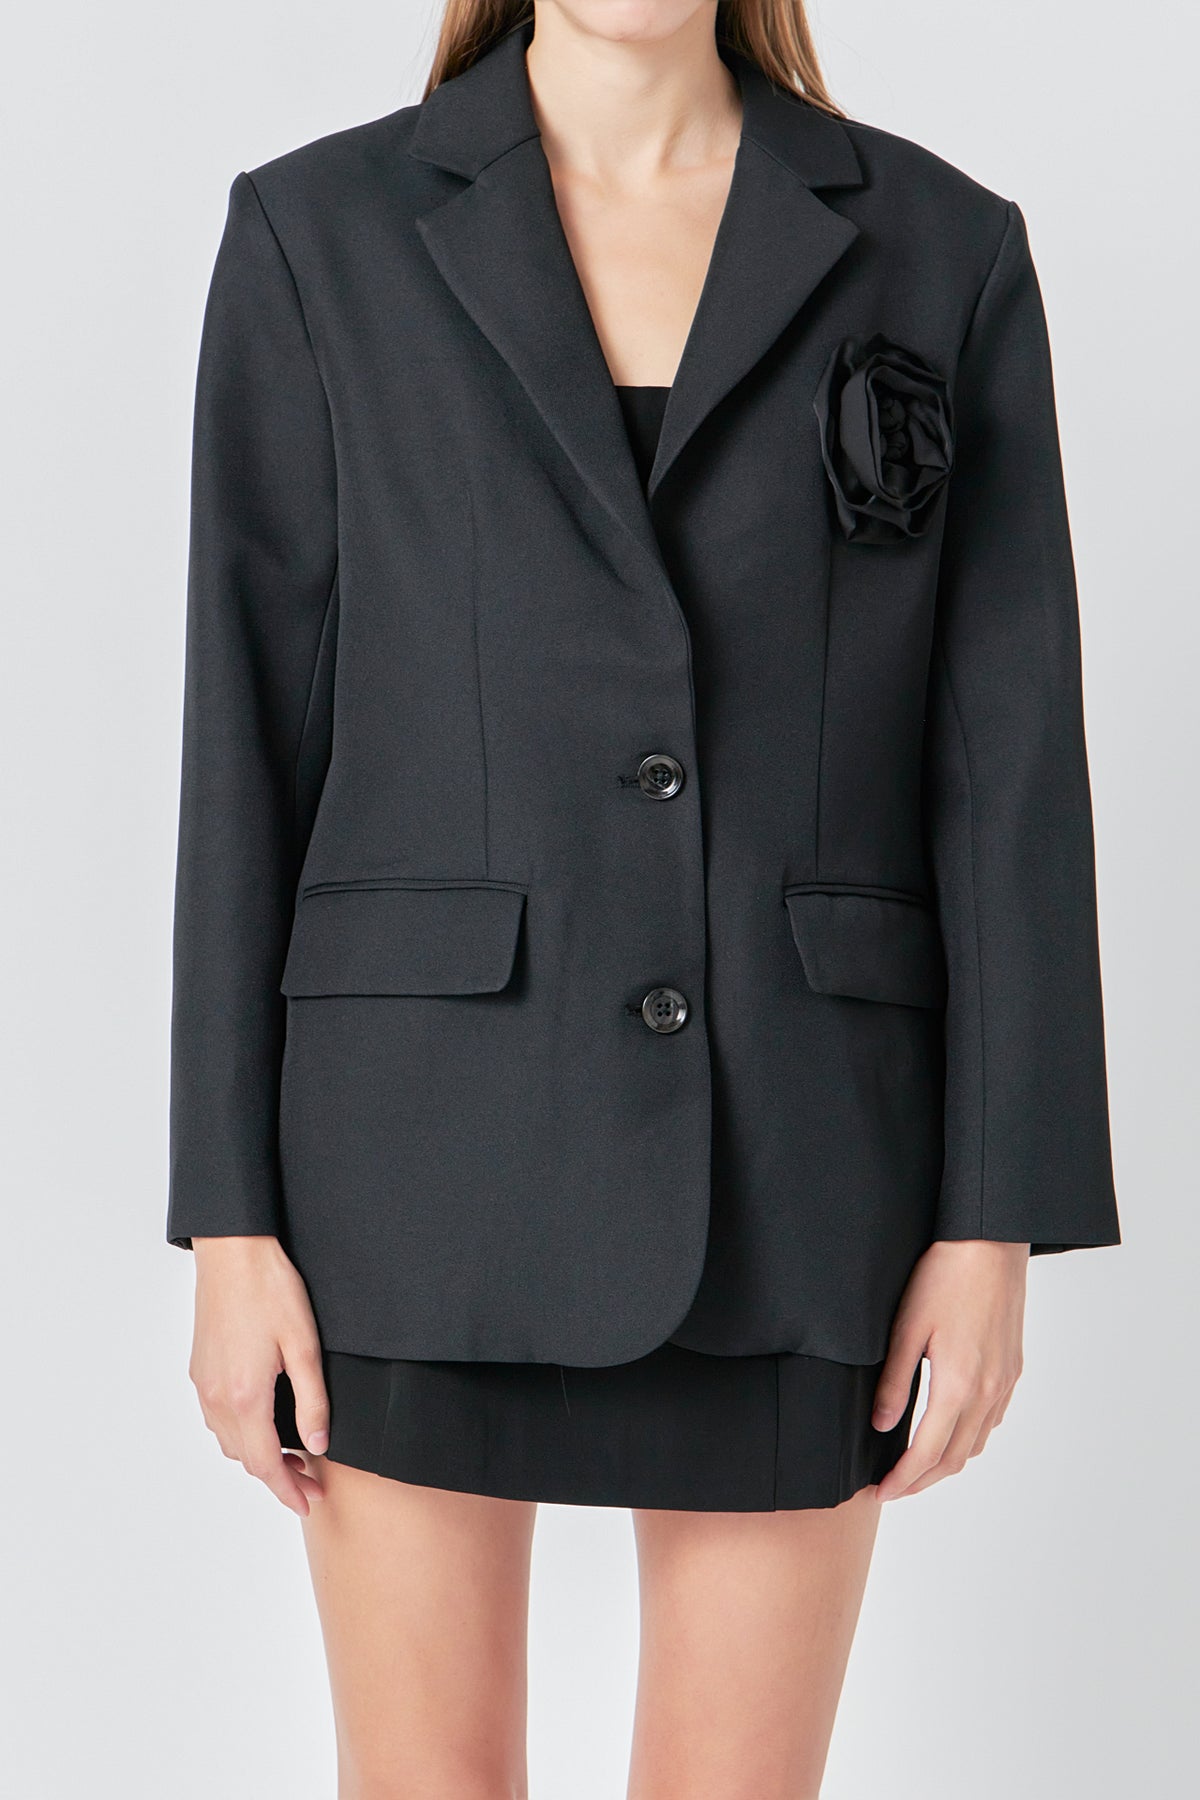 ENDLESS ROSE - Premium Corsage Blazer - BLAZERS available at Objectrare